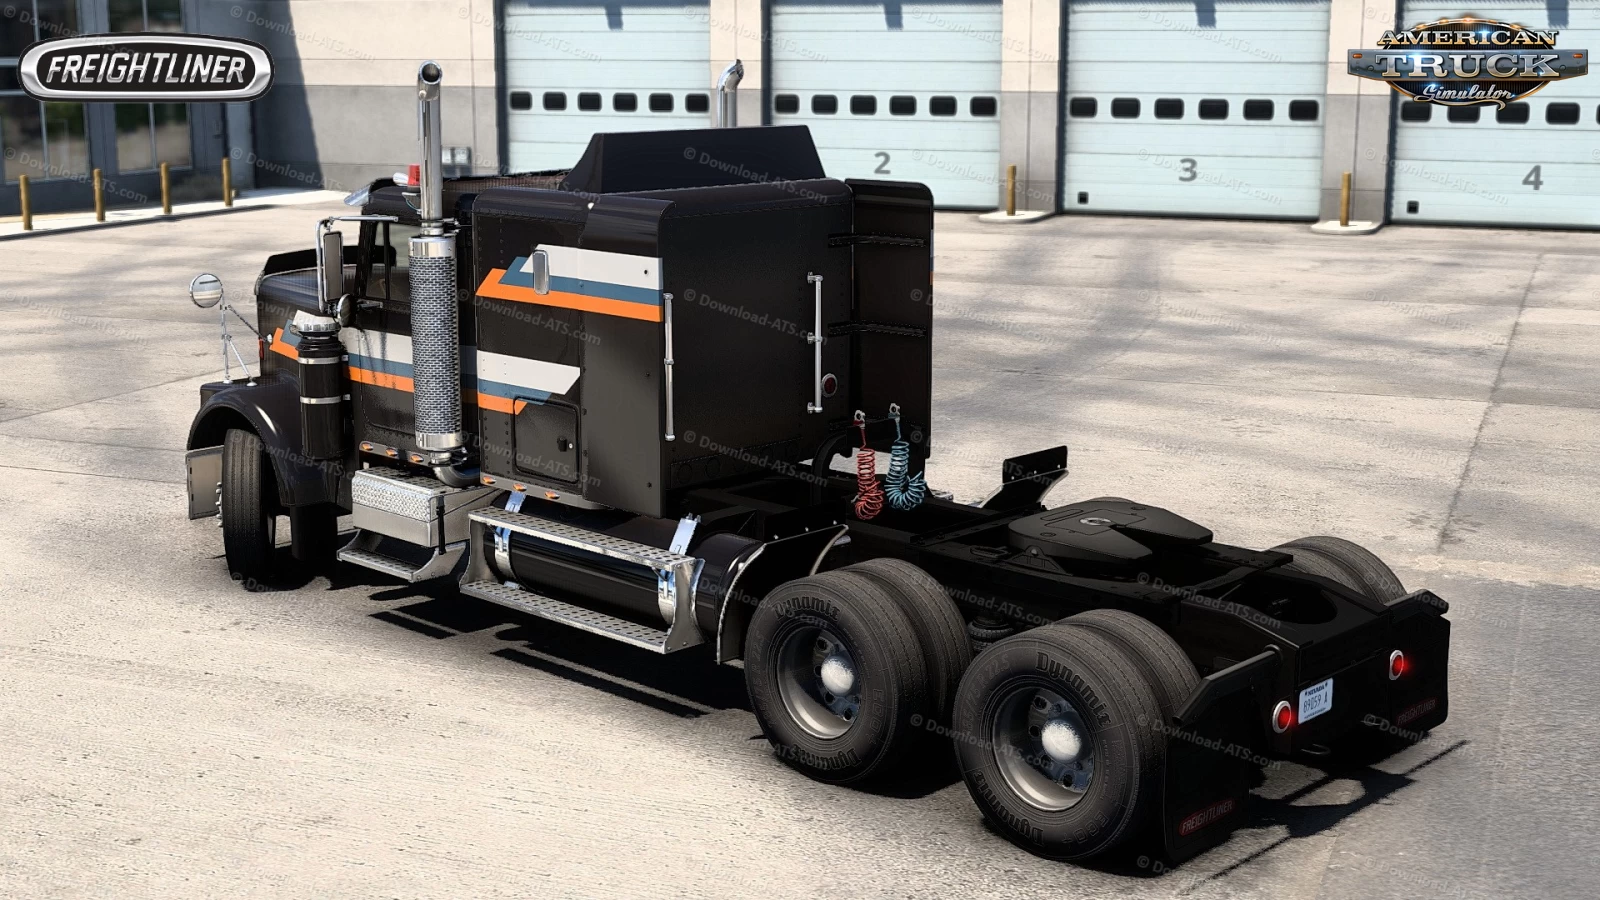 Freightliner FLC12064T Truck v1.0.8 By XBS (1.47.x) for ATS